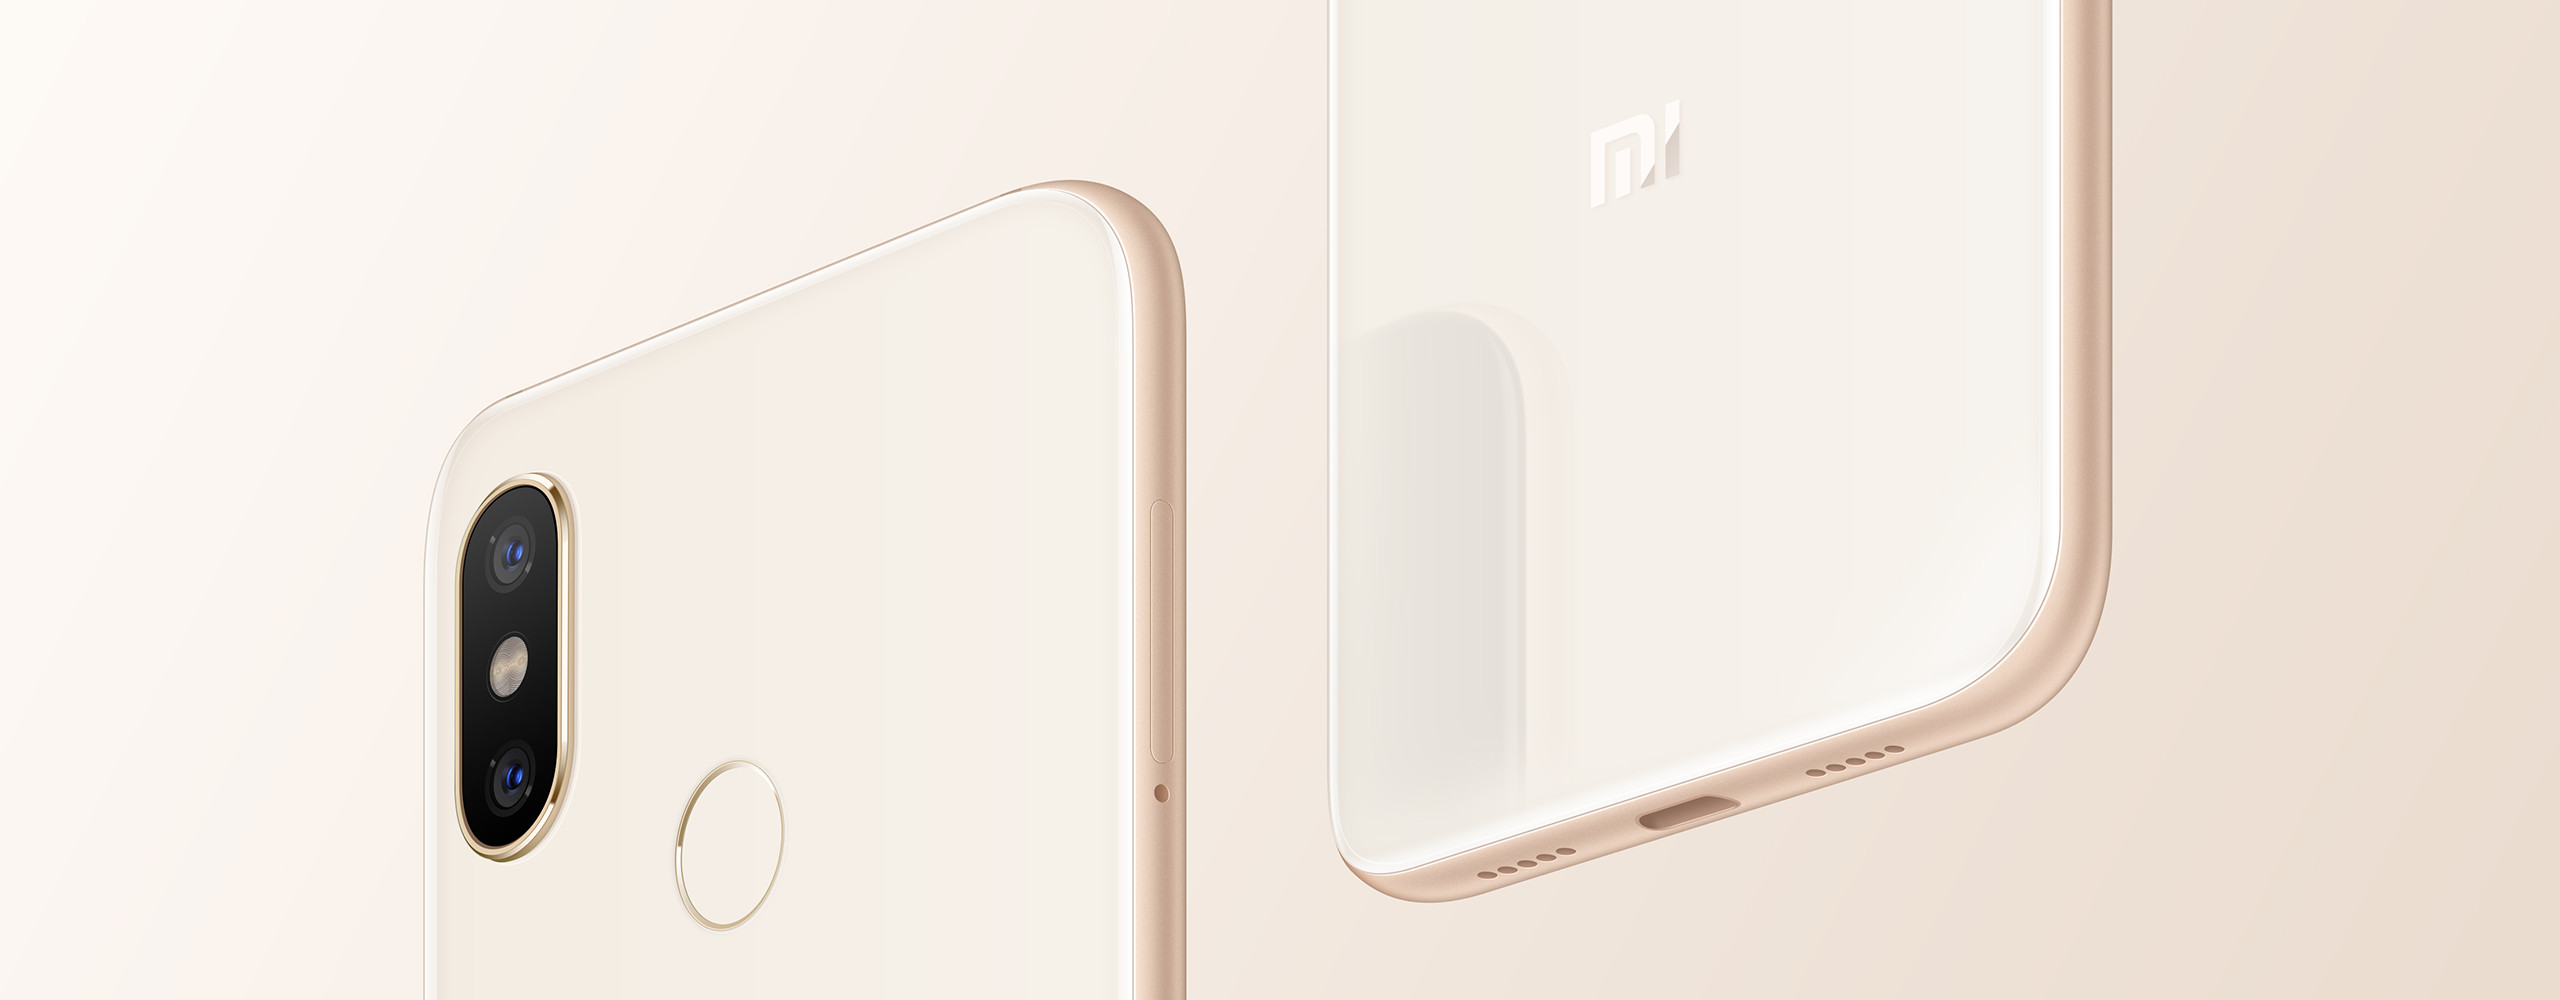 Xiaomi Mi 8 Officially Announced Alongside with Special Edition